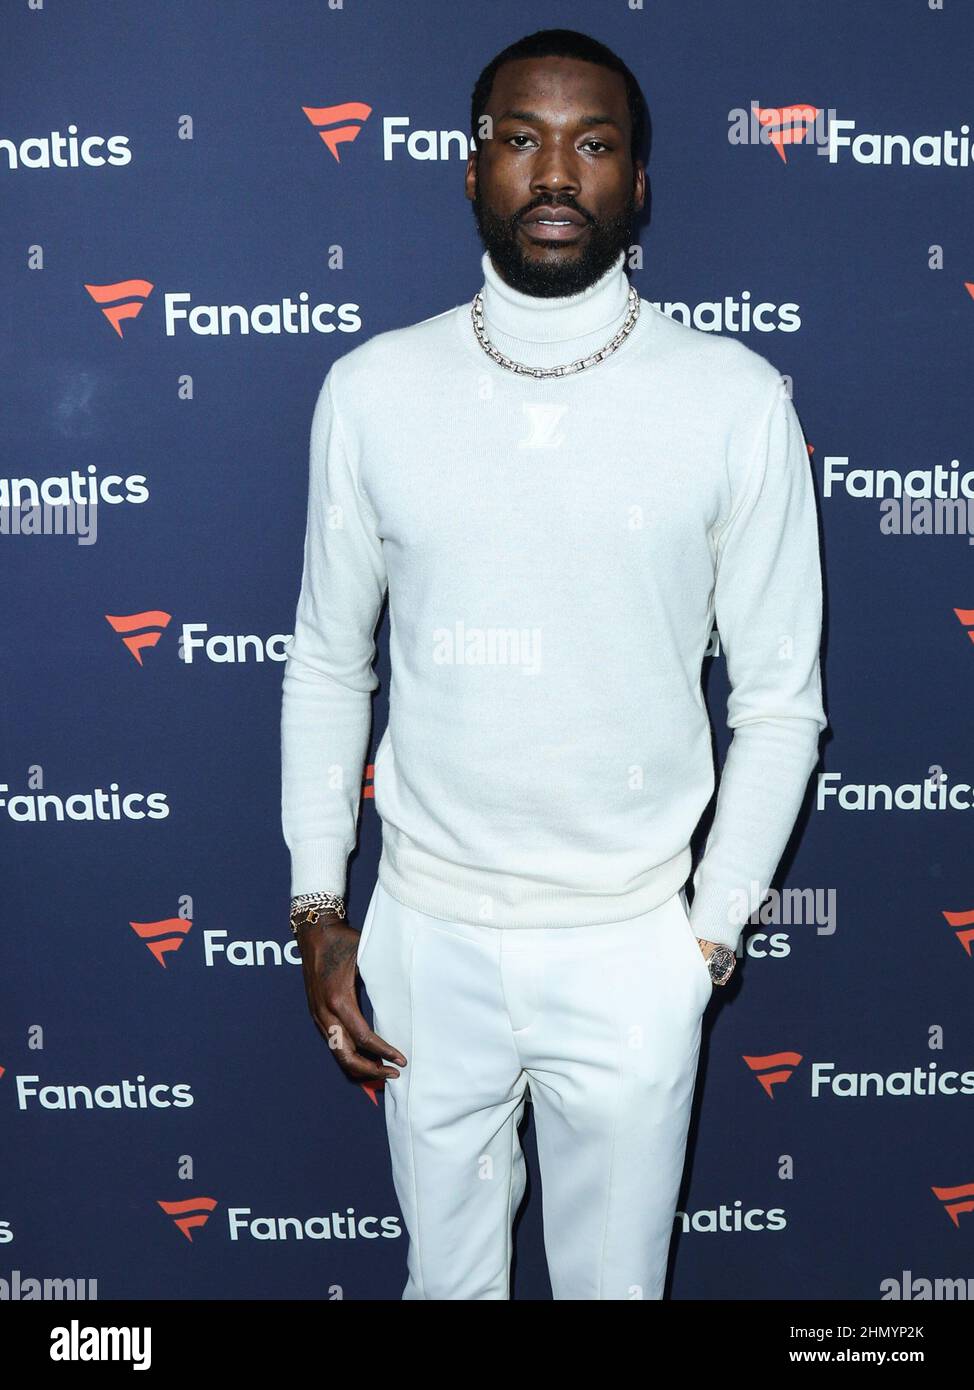 Culver City, United States. 12th Feb, 2022. American rapper Meek Mill  (Robert Rihmeek Williams) arrives at Michael Rubin's Fanatics Super Bowl  Party 2022 held at 3Labs on February 12, 2022 in Culver